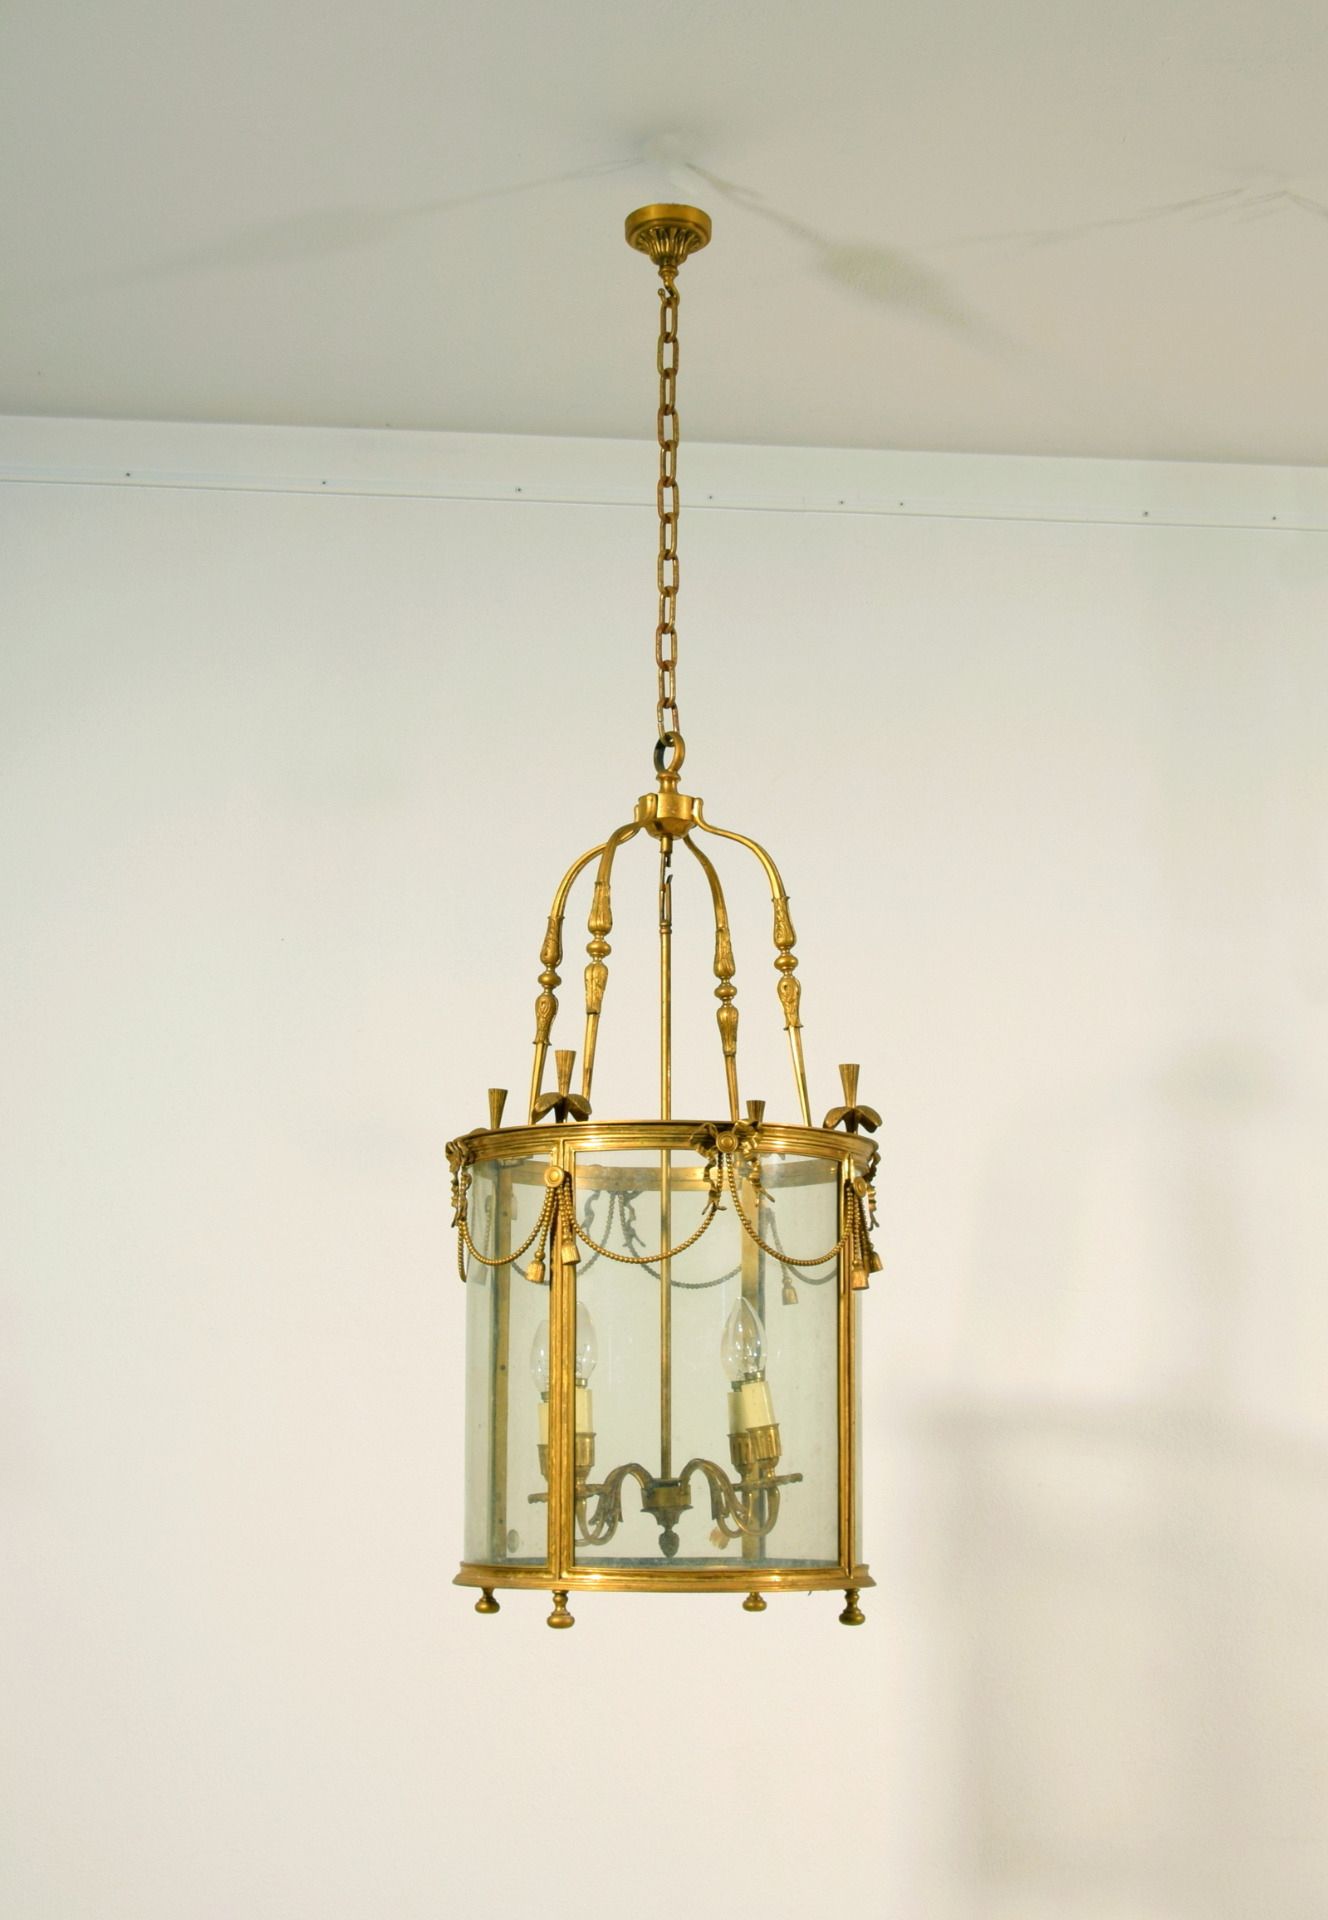 Four Light Gilt Bronze Lantern, France, Early 20th Century – Antique  Chandeliers Throughout Recent Four Light Lantern Chandeliers (View 1 of 10)